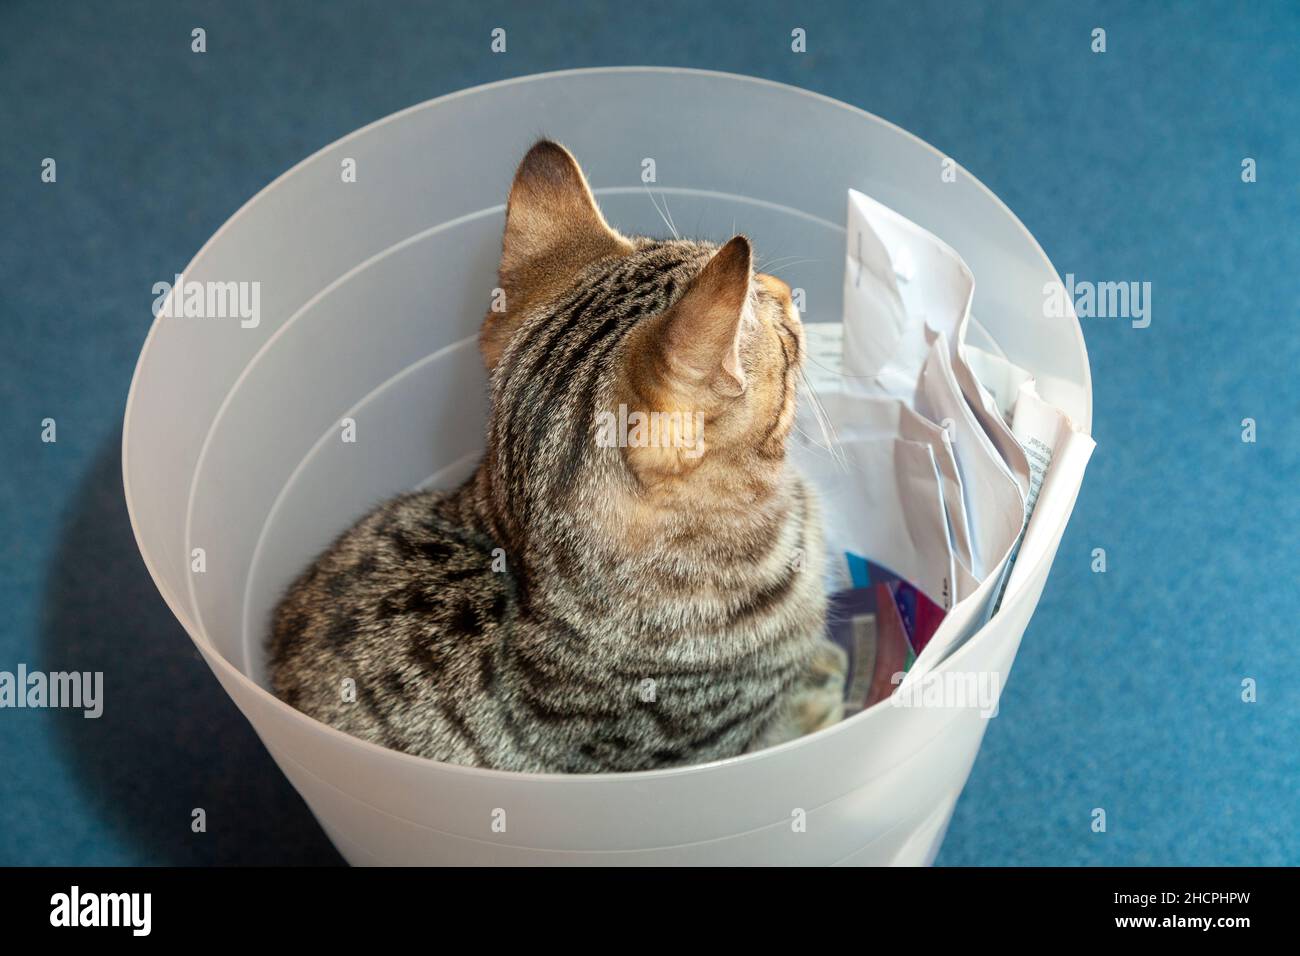 Cat sitting in a wastepaper basket Stock Photo